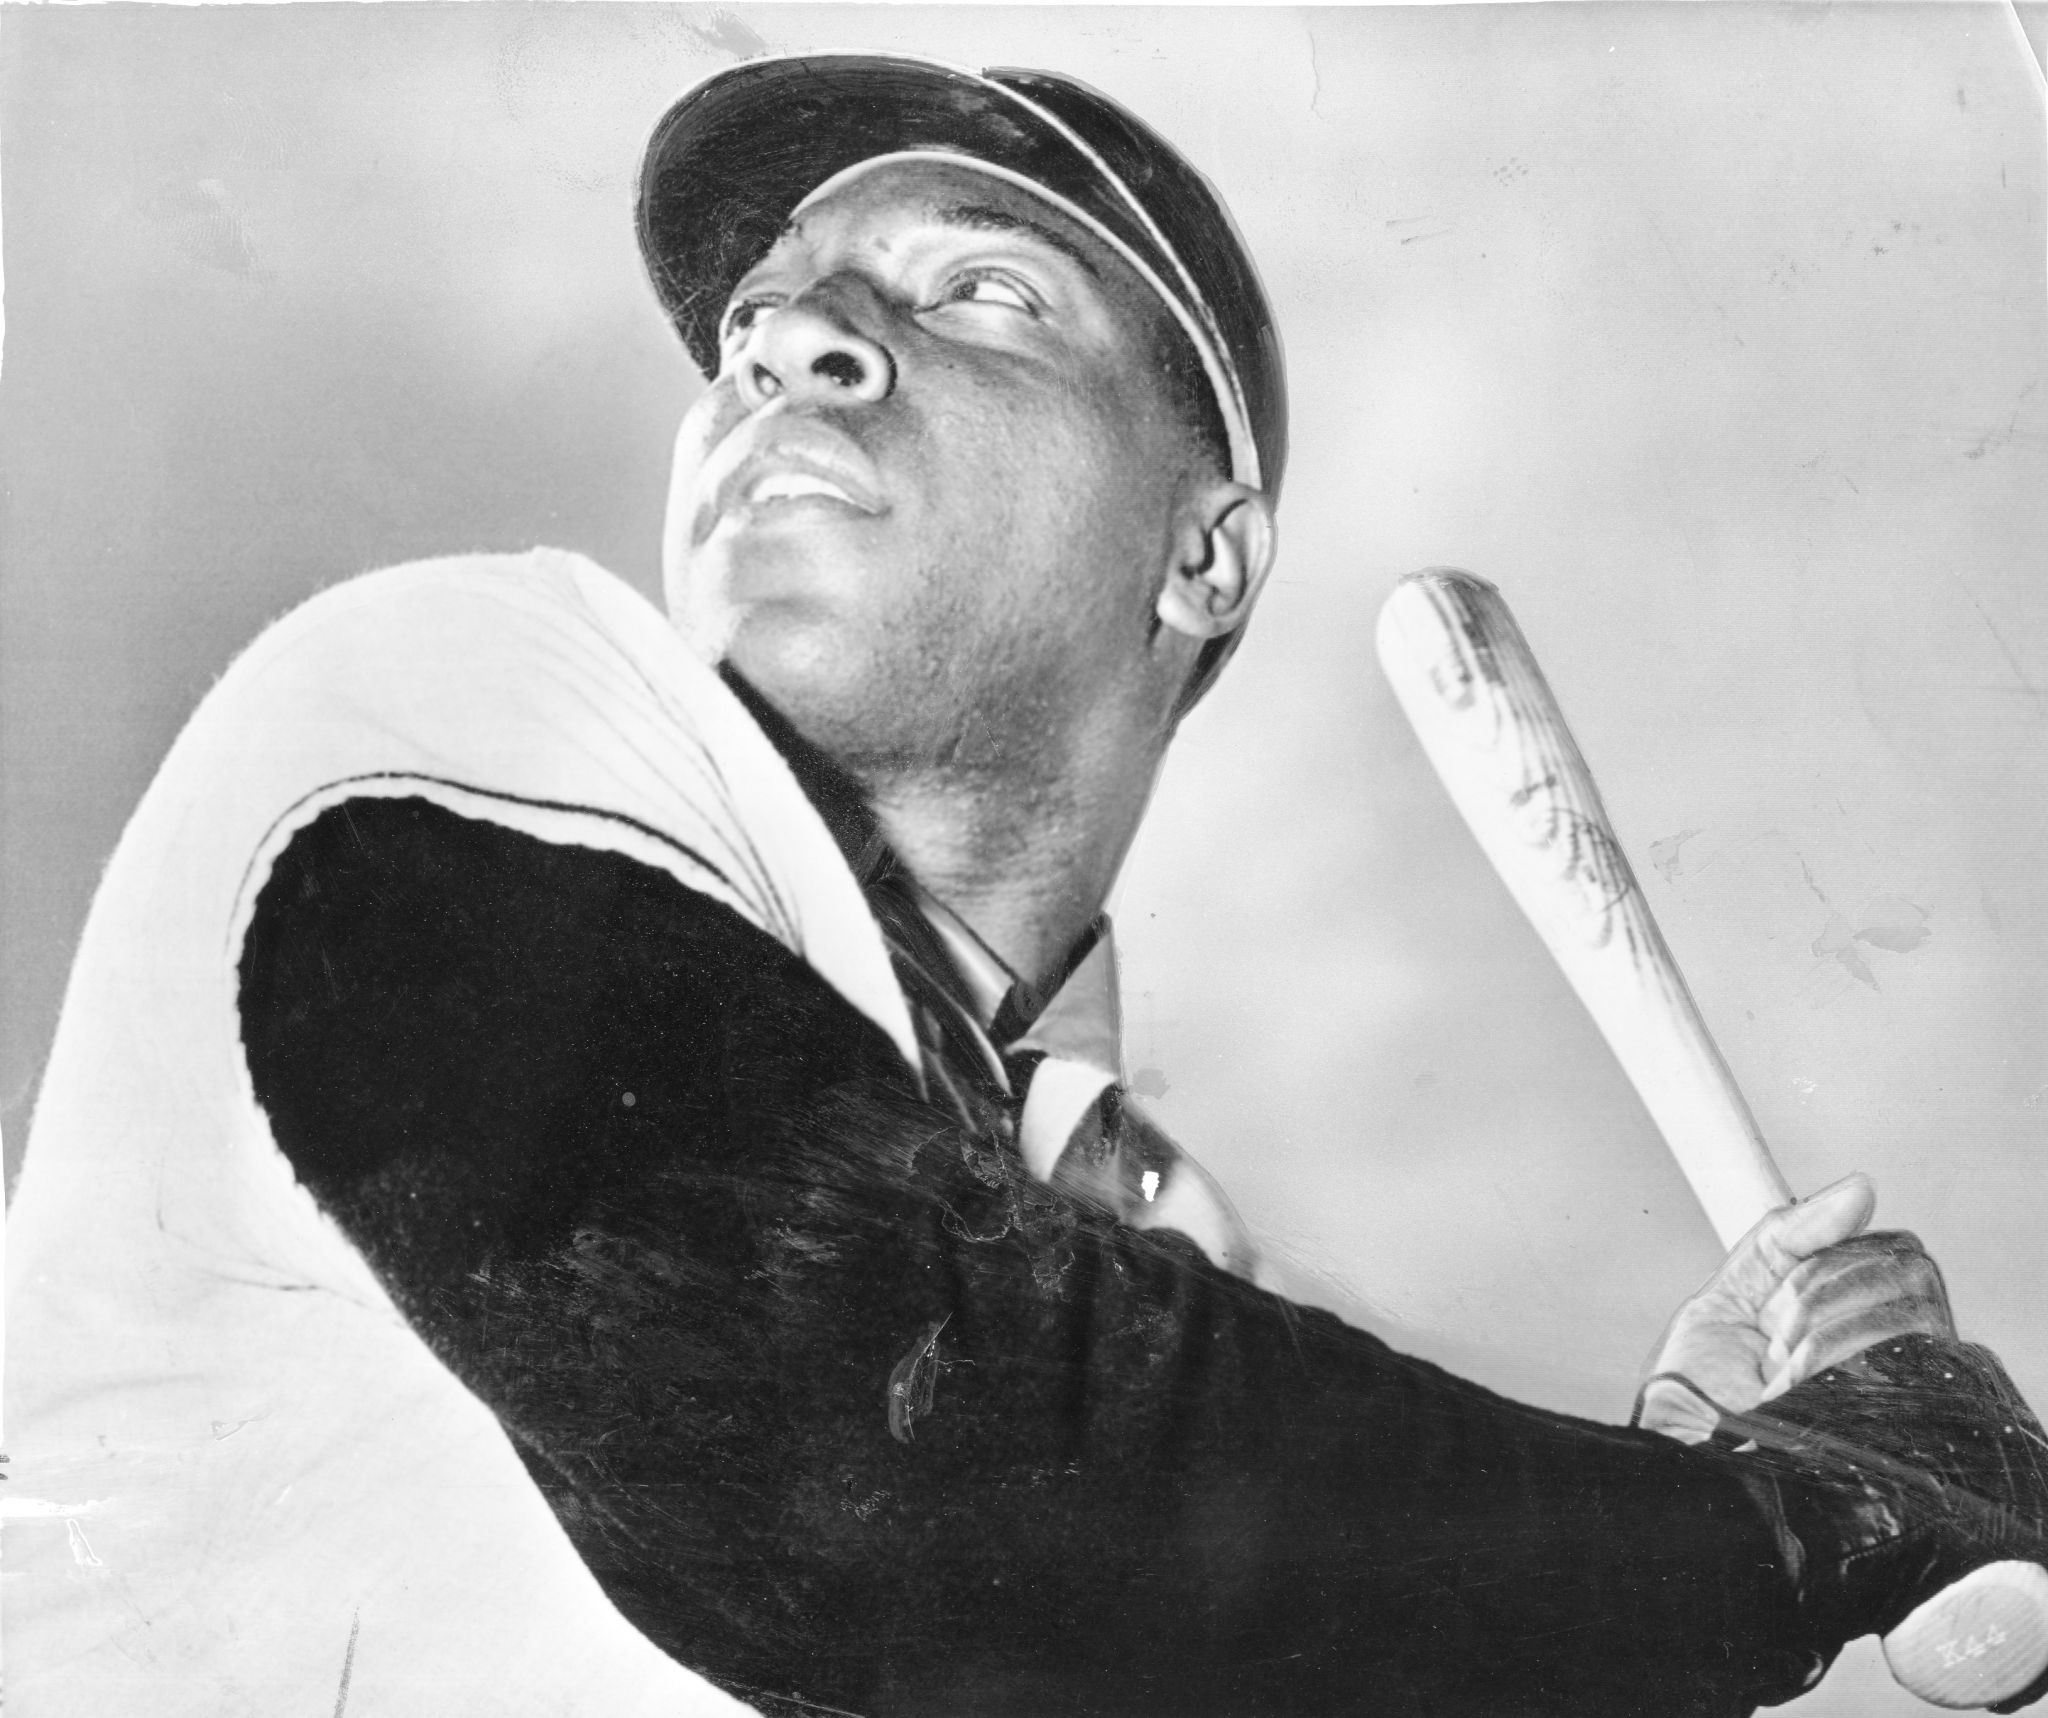 We Say a Sad Good-Bye to the Great Hall-of-Famer Willie McCovey